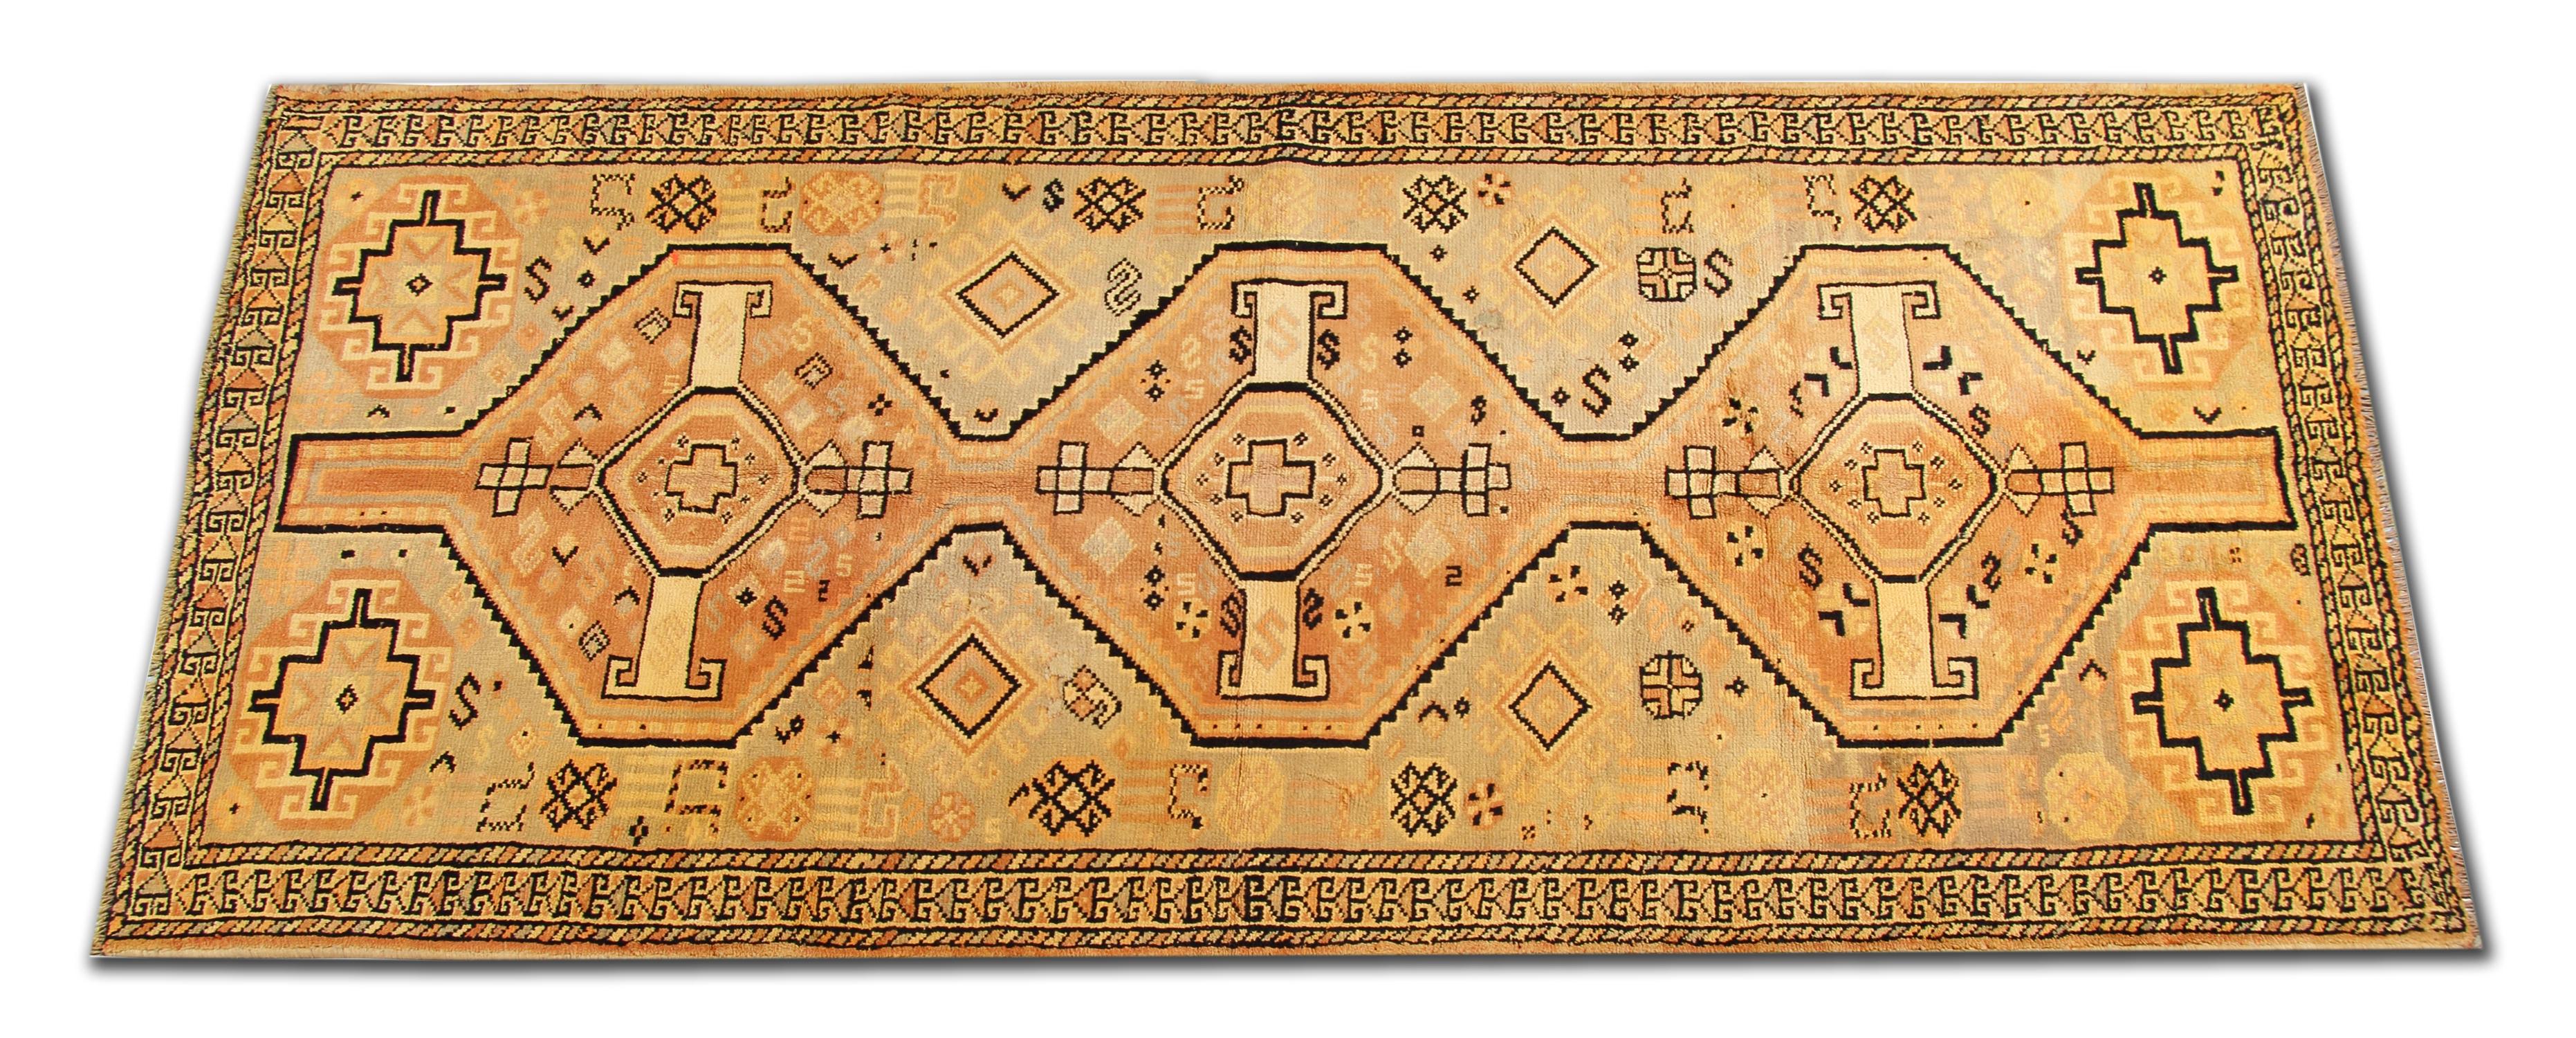 This unique wool runner rug is a vintage piece woven in the late 20th century. The design has been woven with a simple colour palette including rust, beige and black, with tribal motifs woven in a symmetrical pattern. The colour and the design in